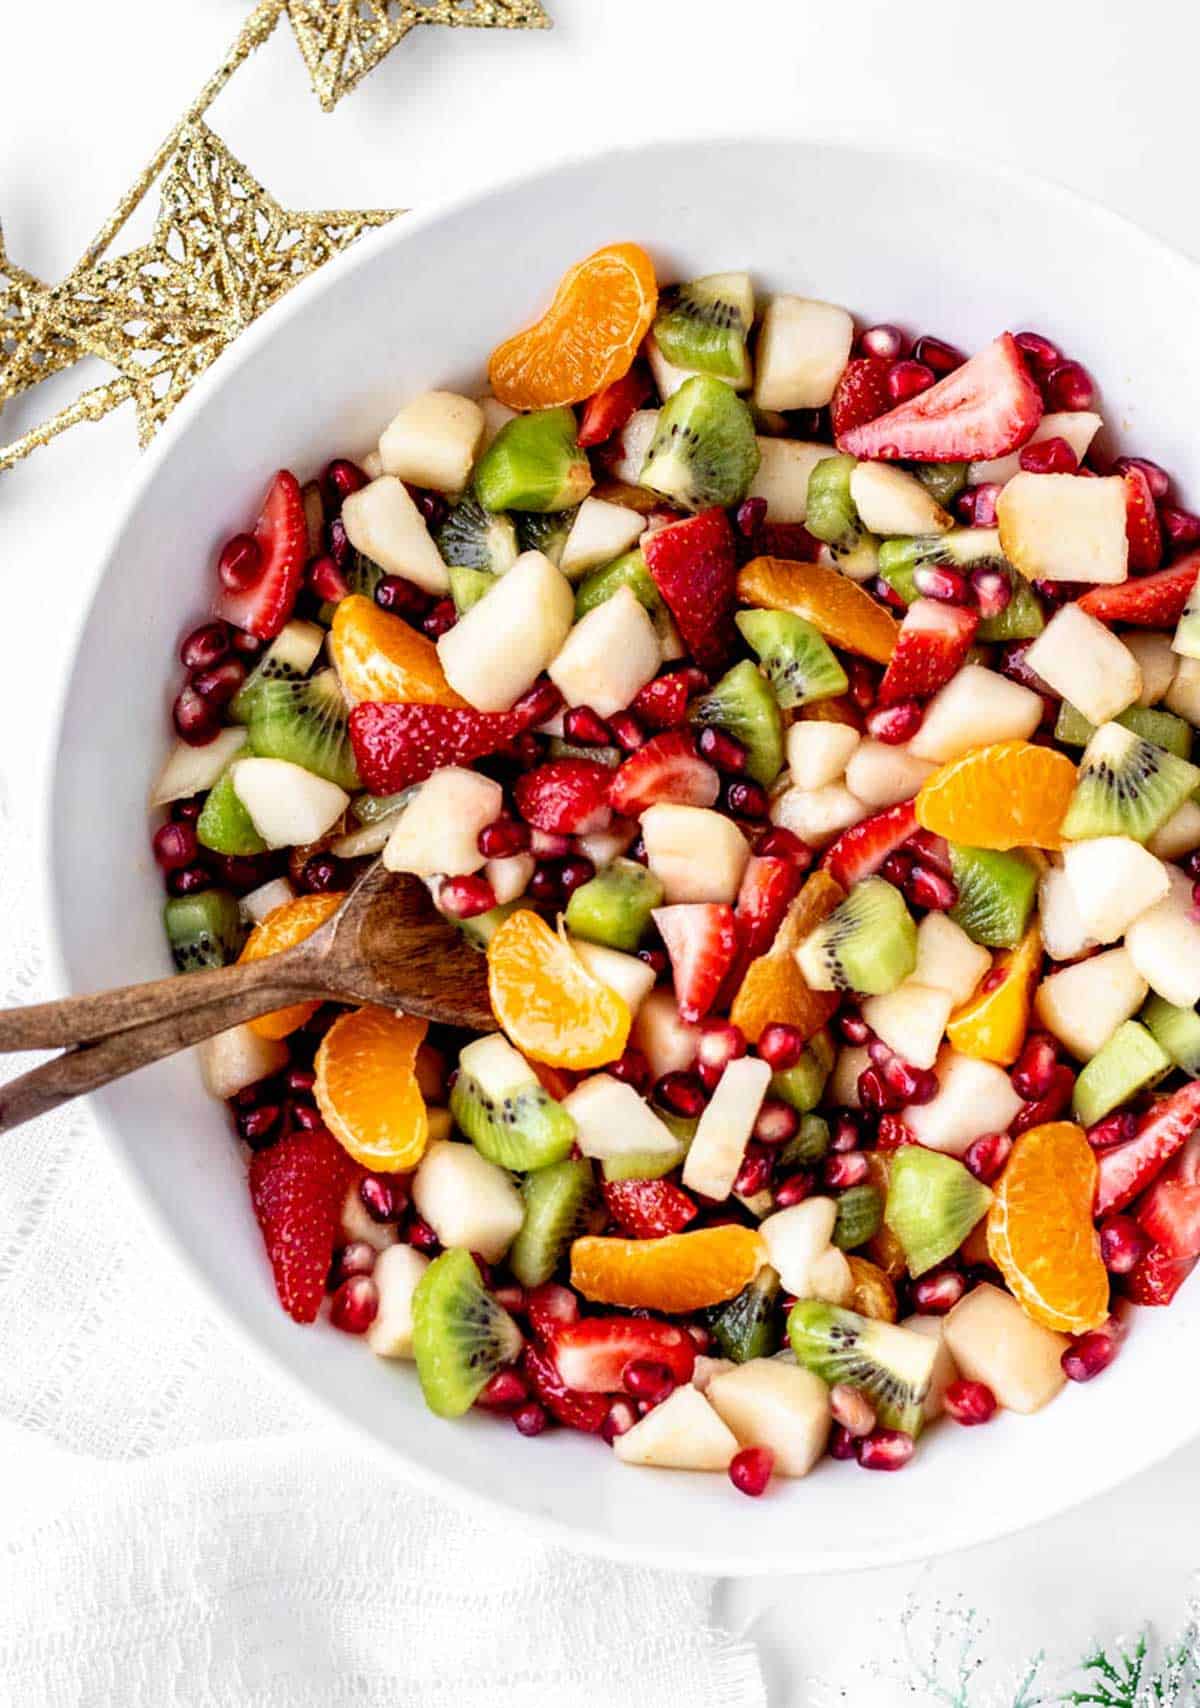 A large white serving bowl of mixed winter fruit salad, with a wooden serving spoon.